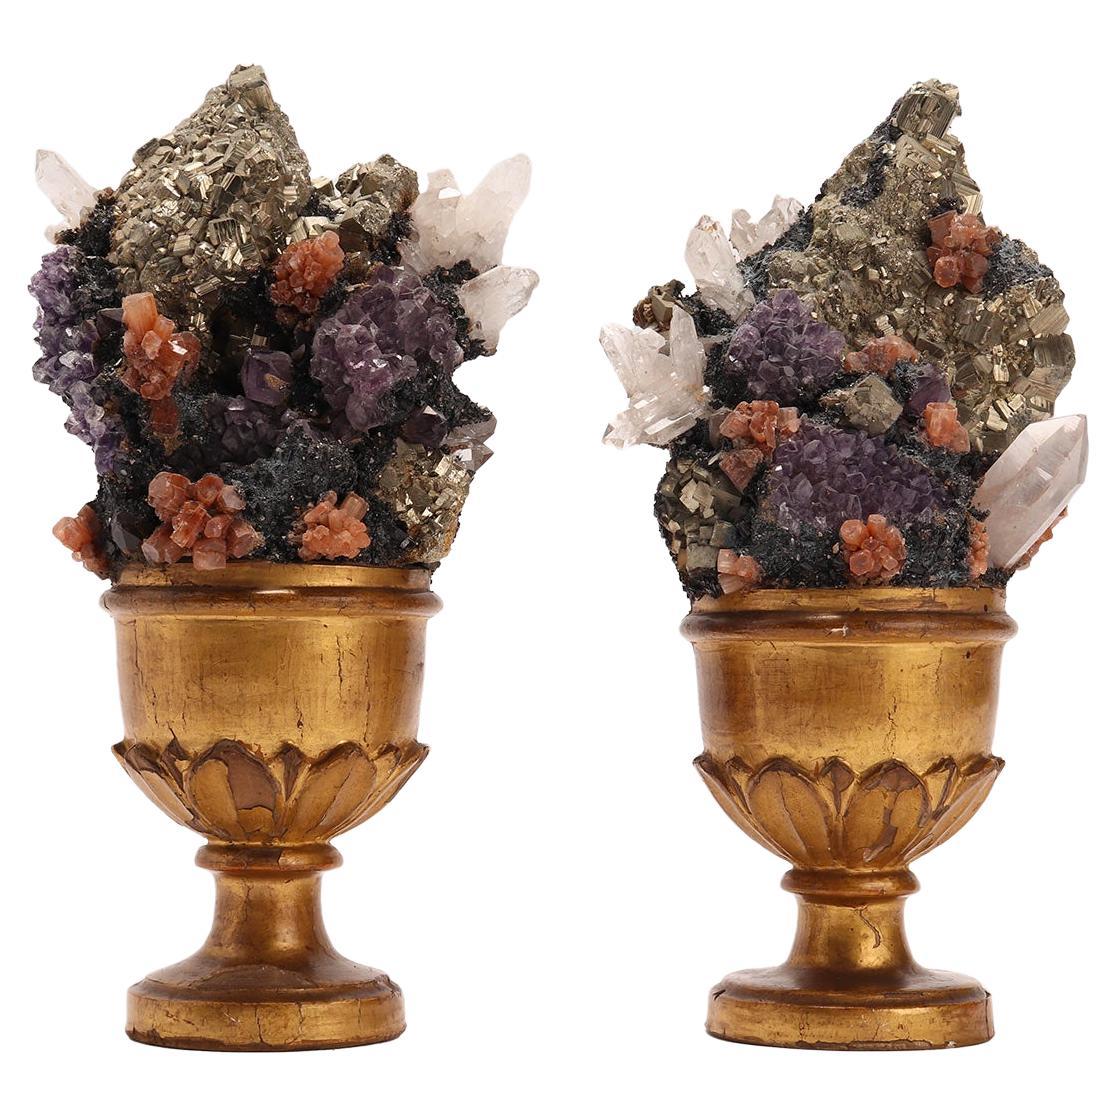 Pair of Rock Crystals, Amethyste, Pyrite and Aragonite Druzes, Italy 1880